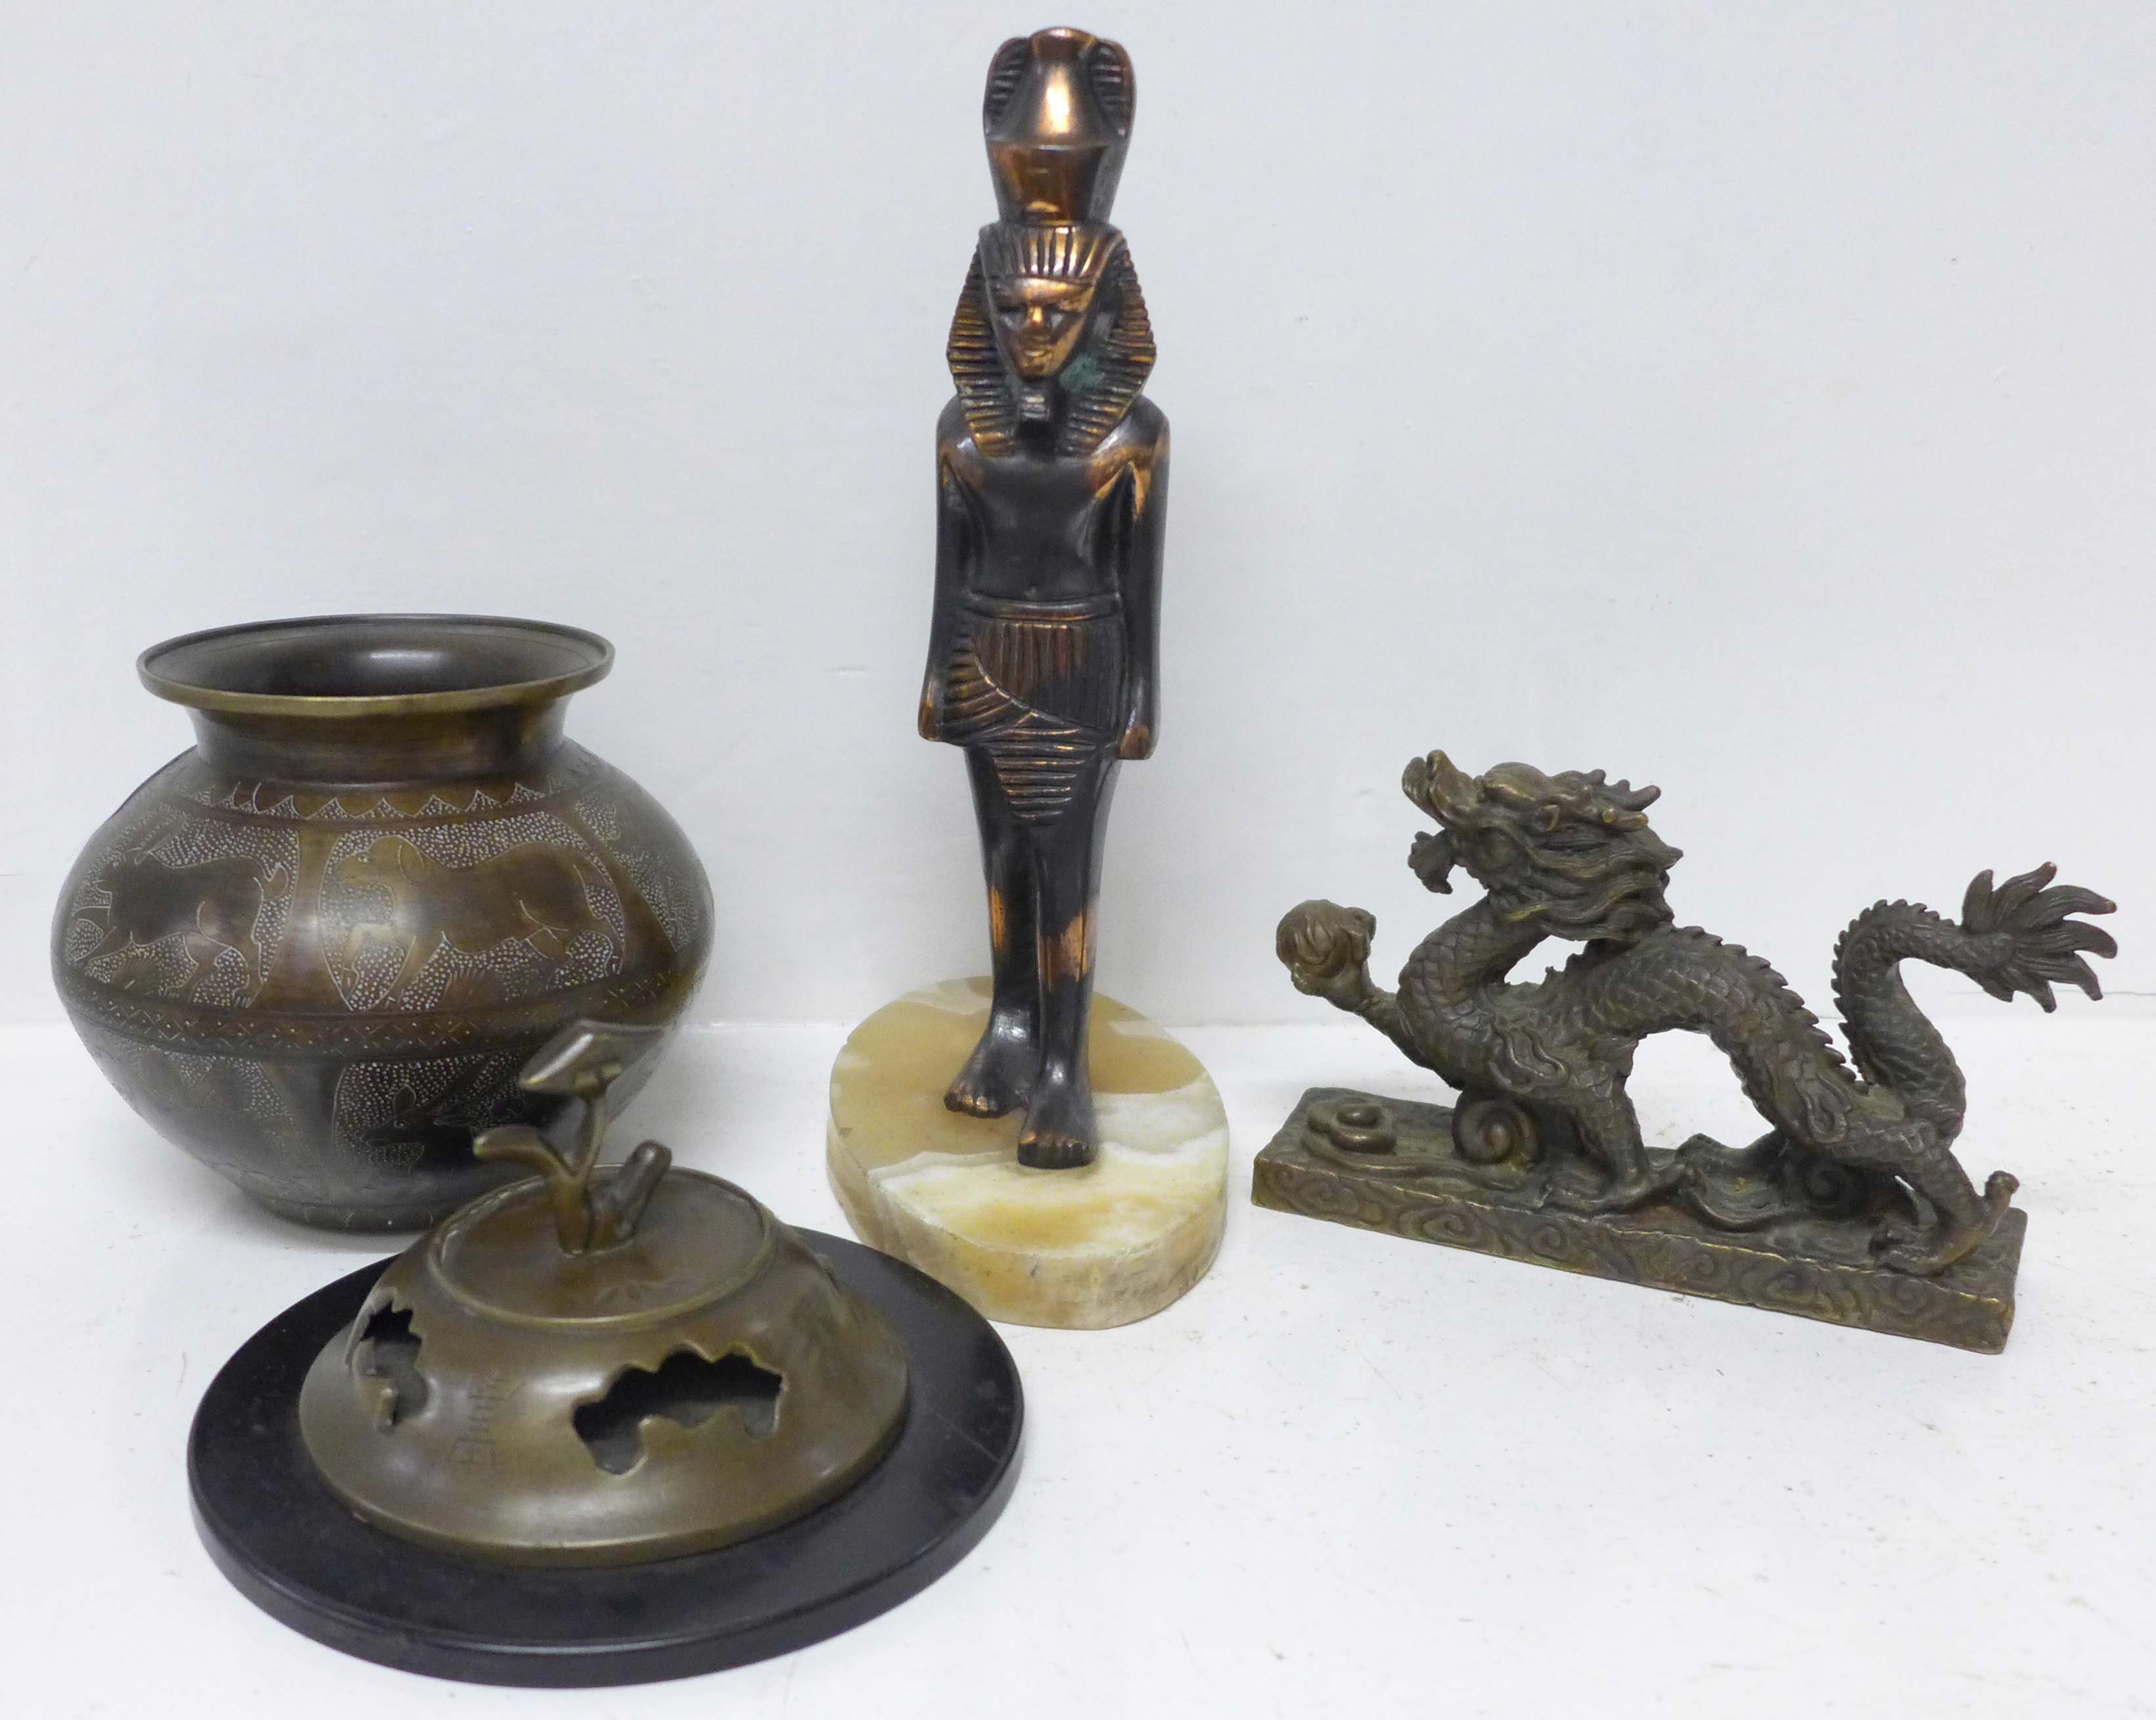 A Chinese censer, a Middle Eastern bronze pot, a Chinese brass dragon figure and an Egyptian figure